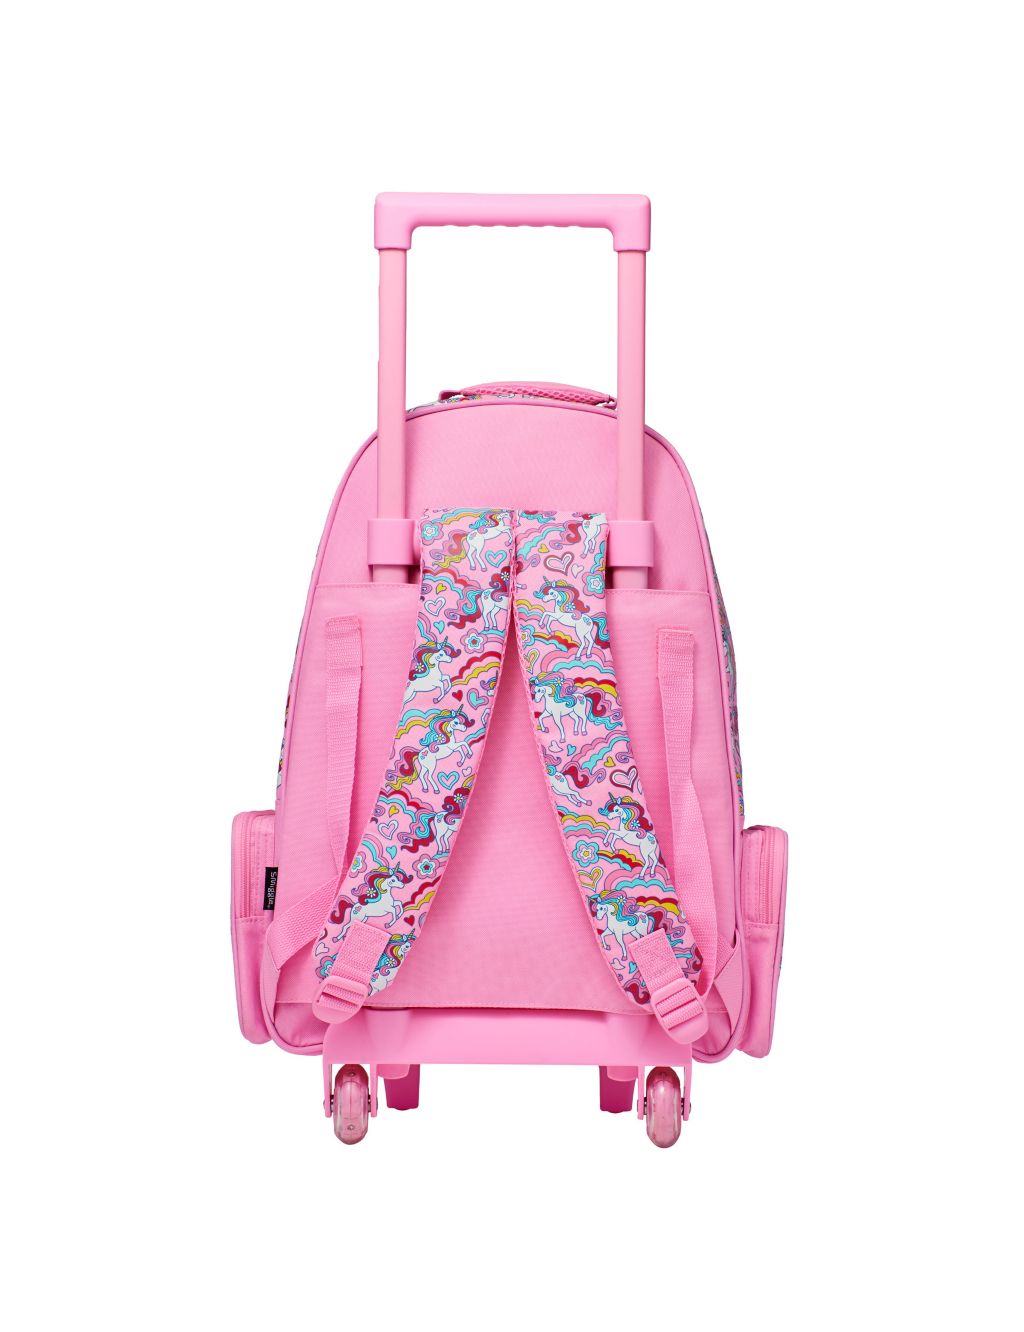 Kids' Patterned Trolley Backpack (3+ Yrs) image 3